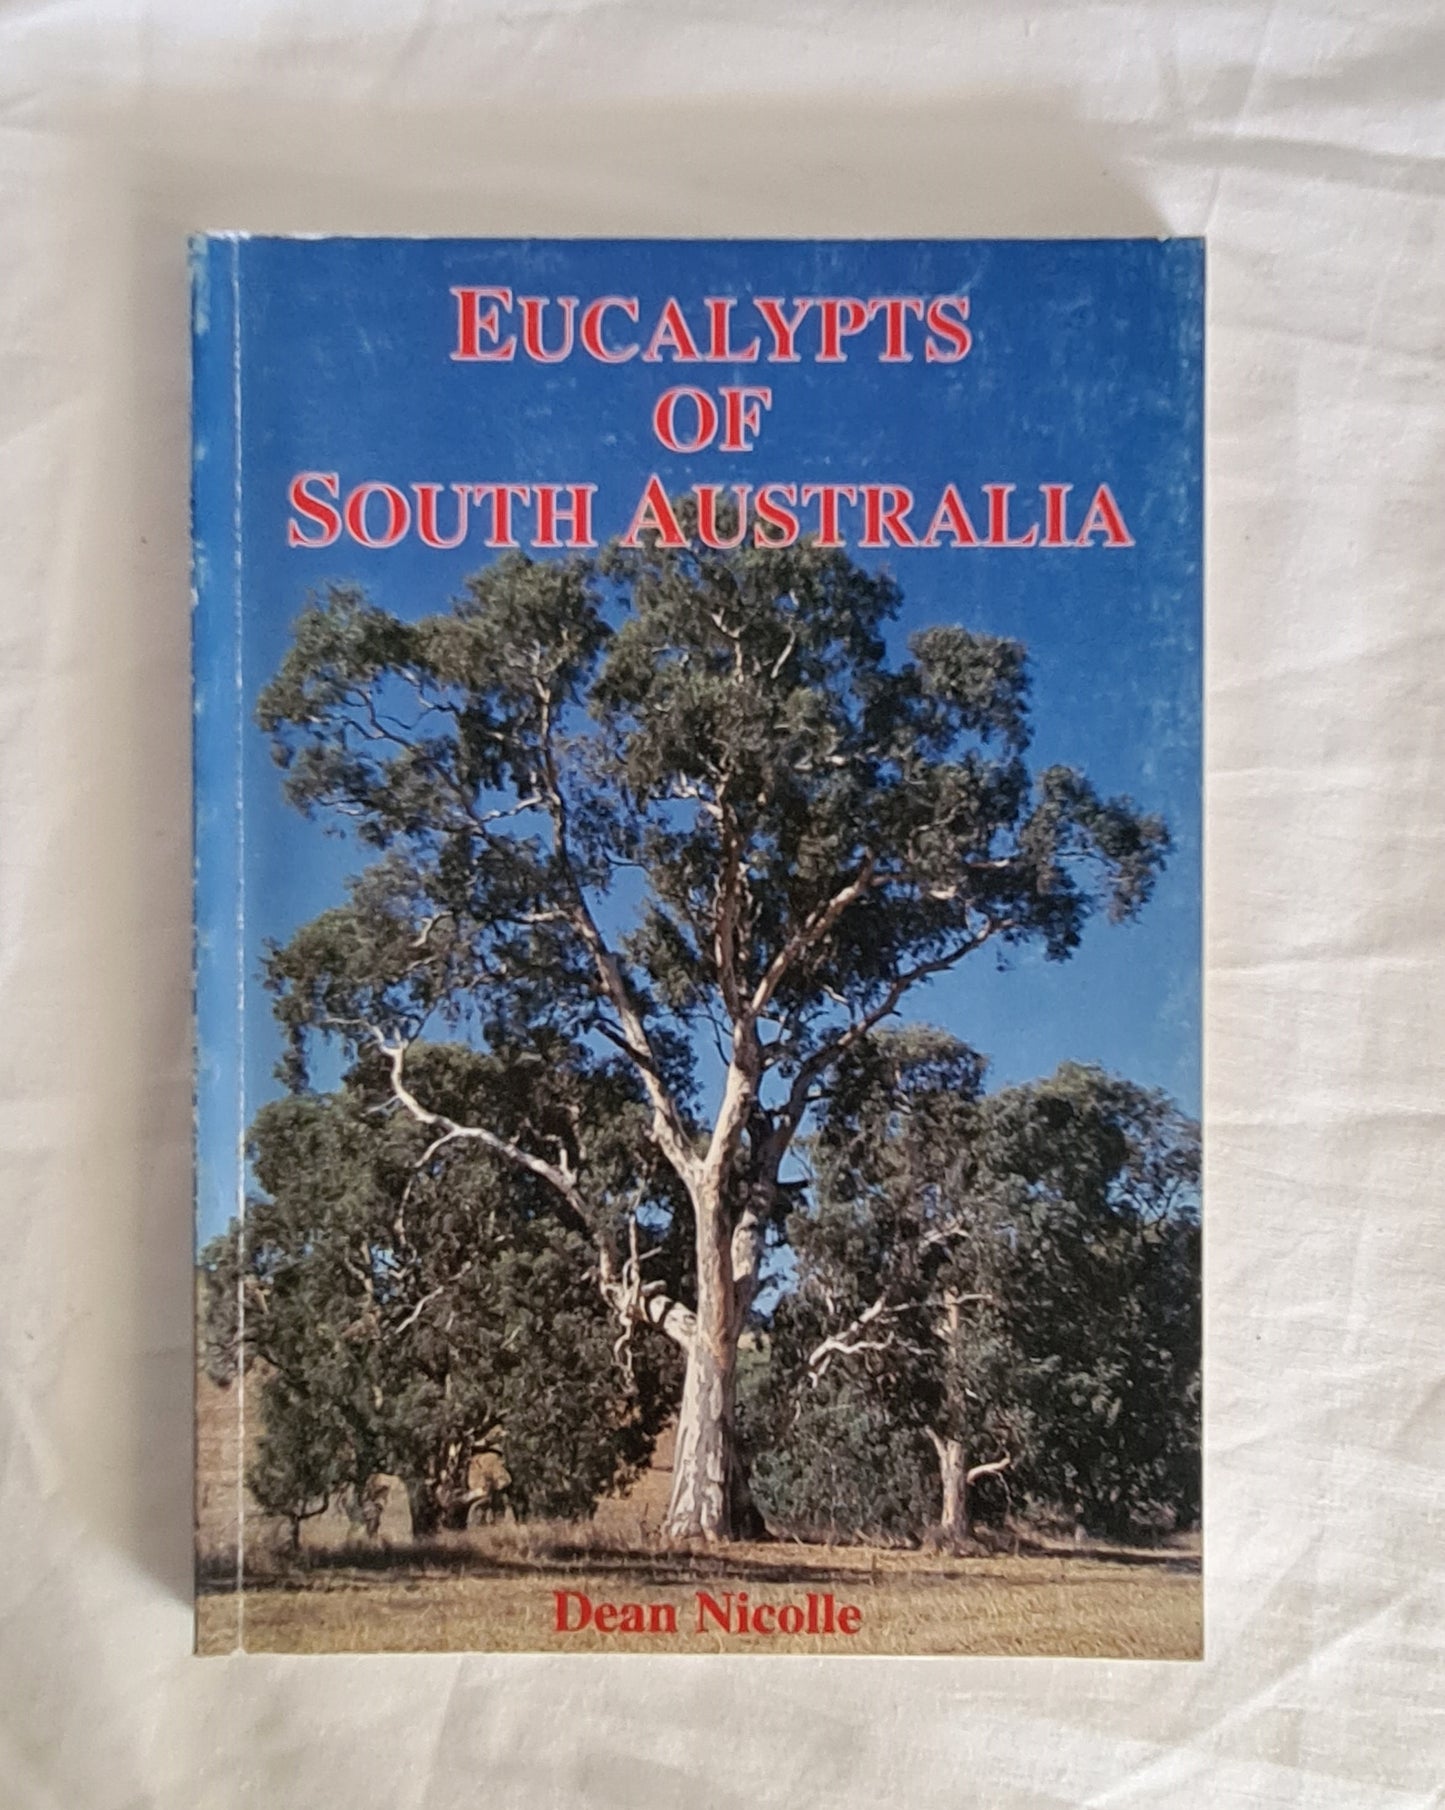 Eucalypts of South Australia  by Dean Nicolle